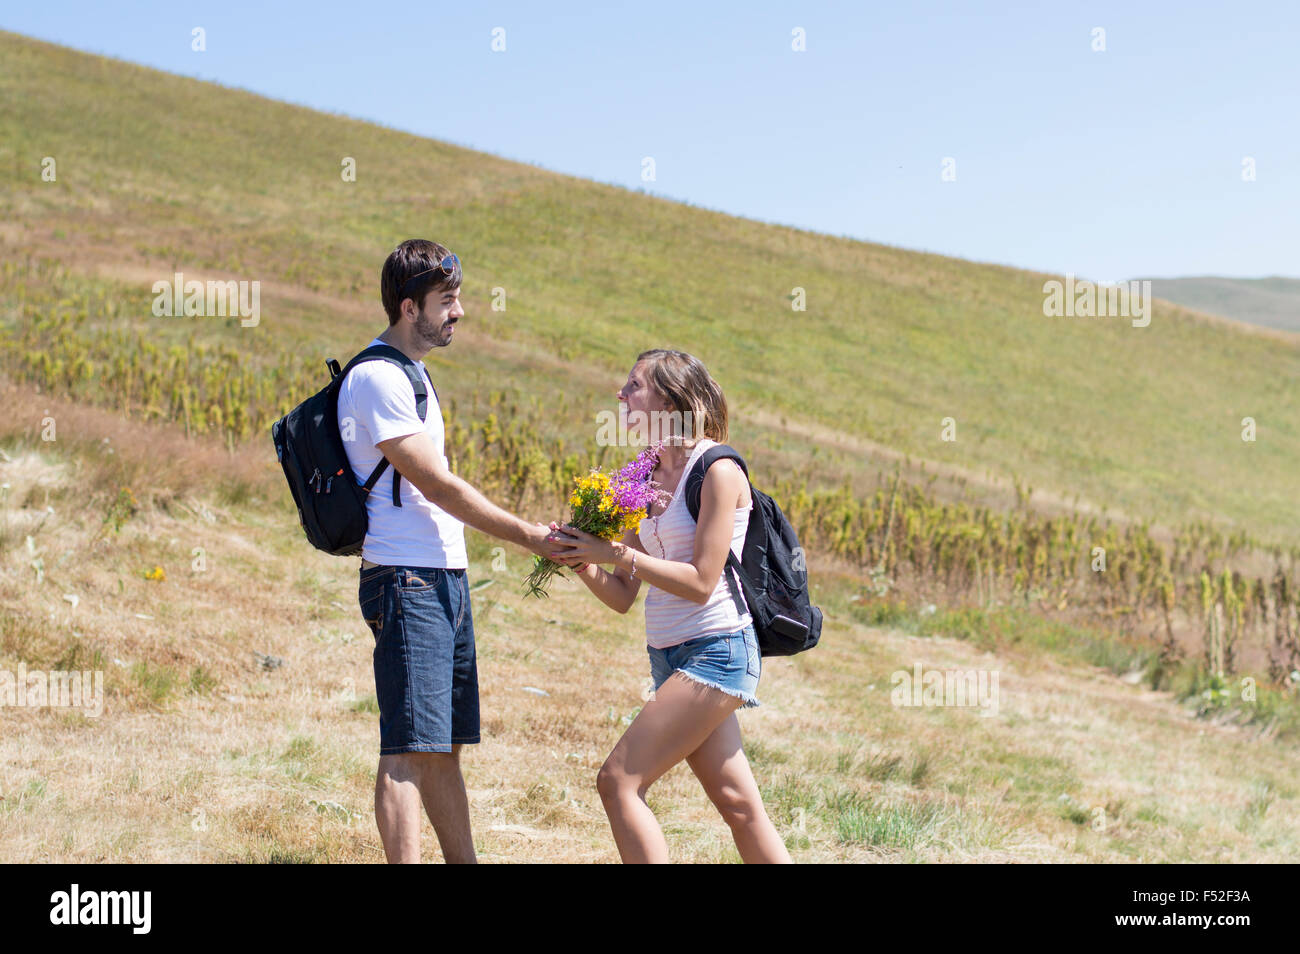 Hiker gives flowers to a woman on a hiking trip at the mountain Stock Photo